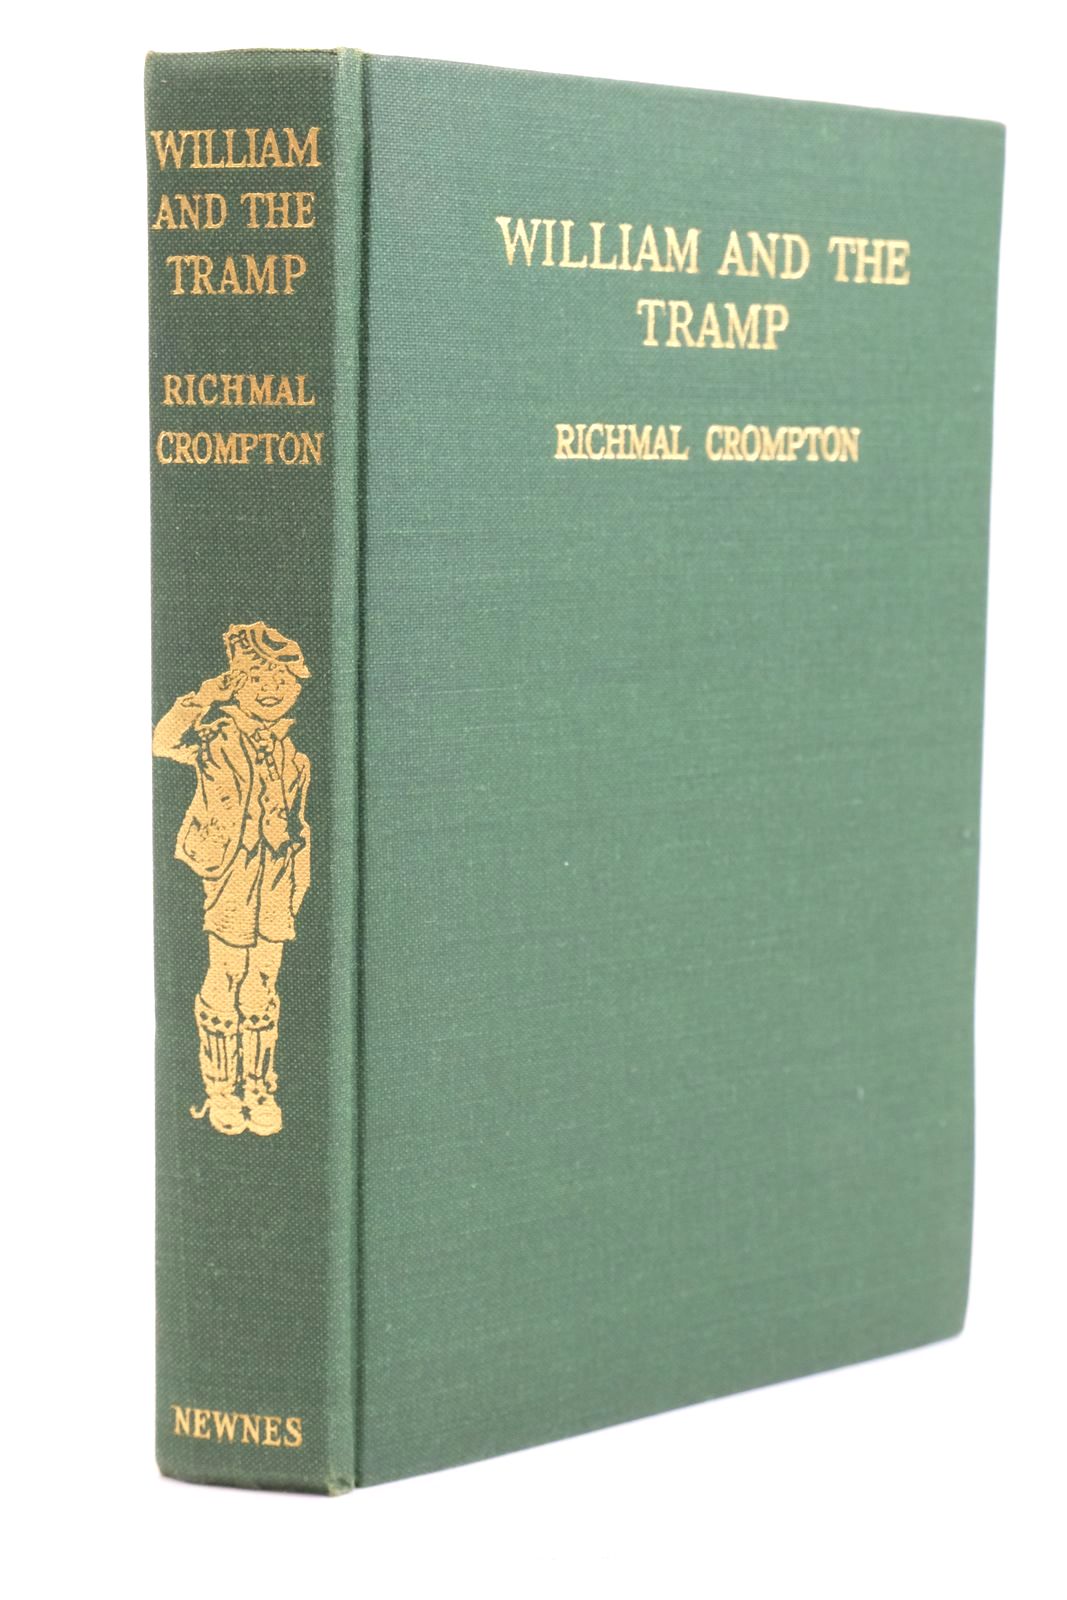 Photo of WILLIAM AND THE TRAMP written by Crompton, Richmal illustrated by Henry, Thomas published by George Newnes Ltd. (STOCK CODE: 1320870)  for sale by Stella & Rose's Books